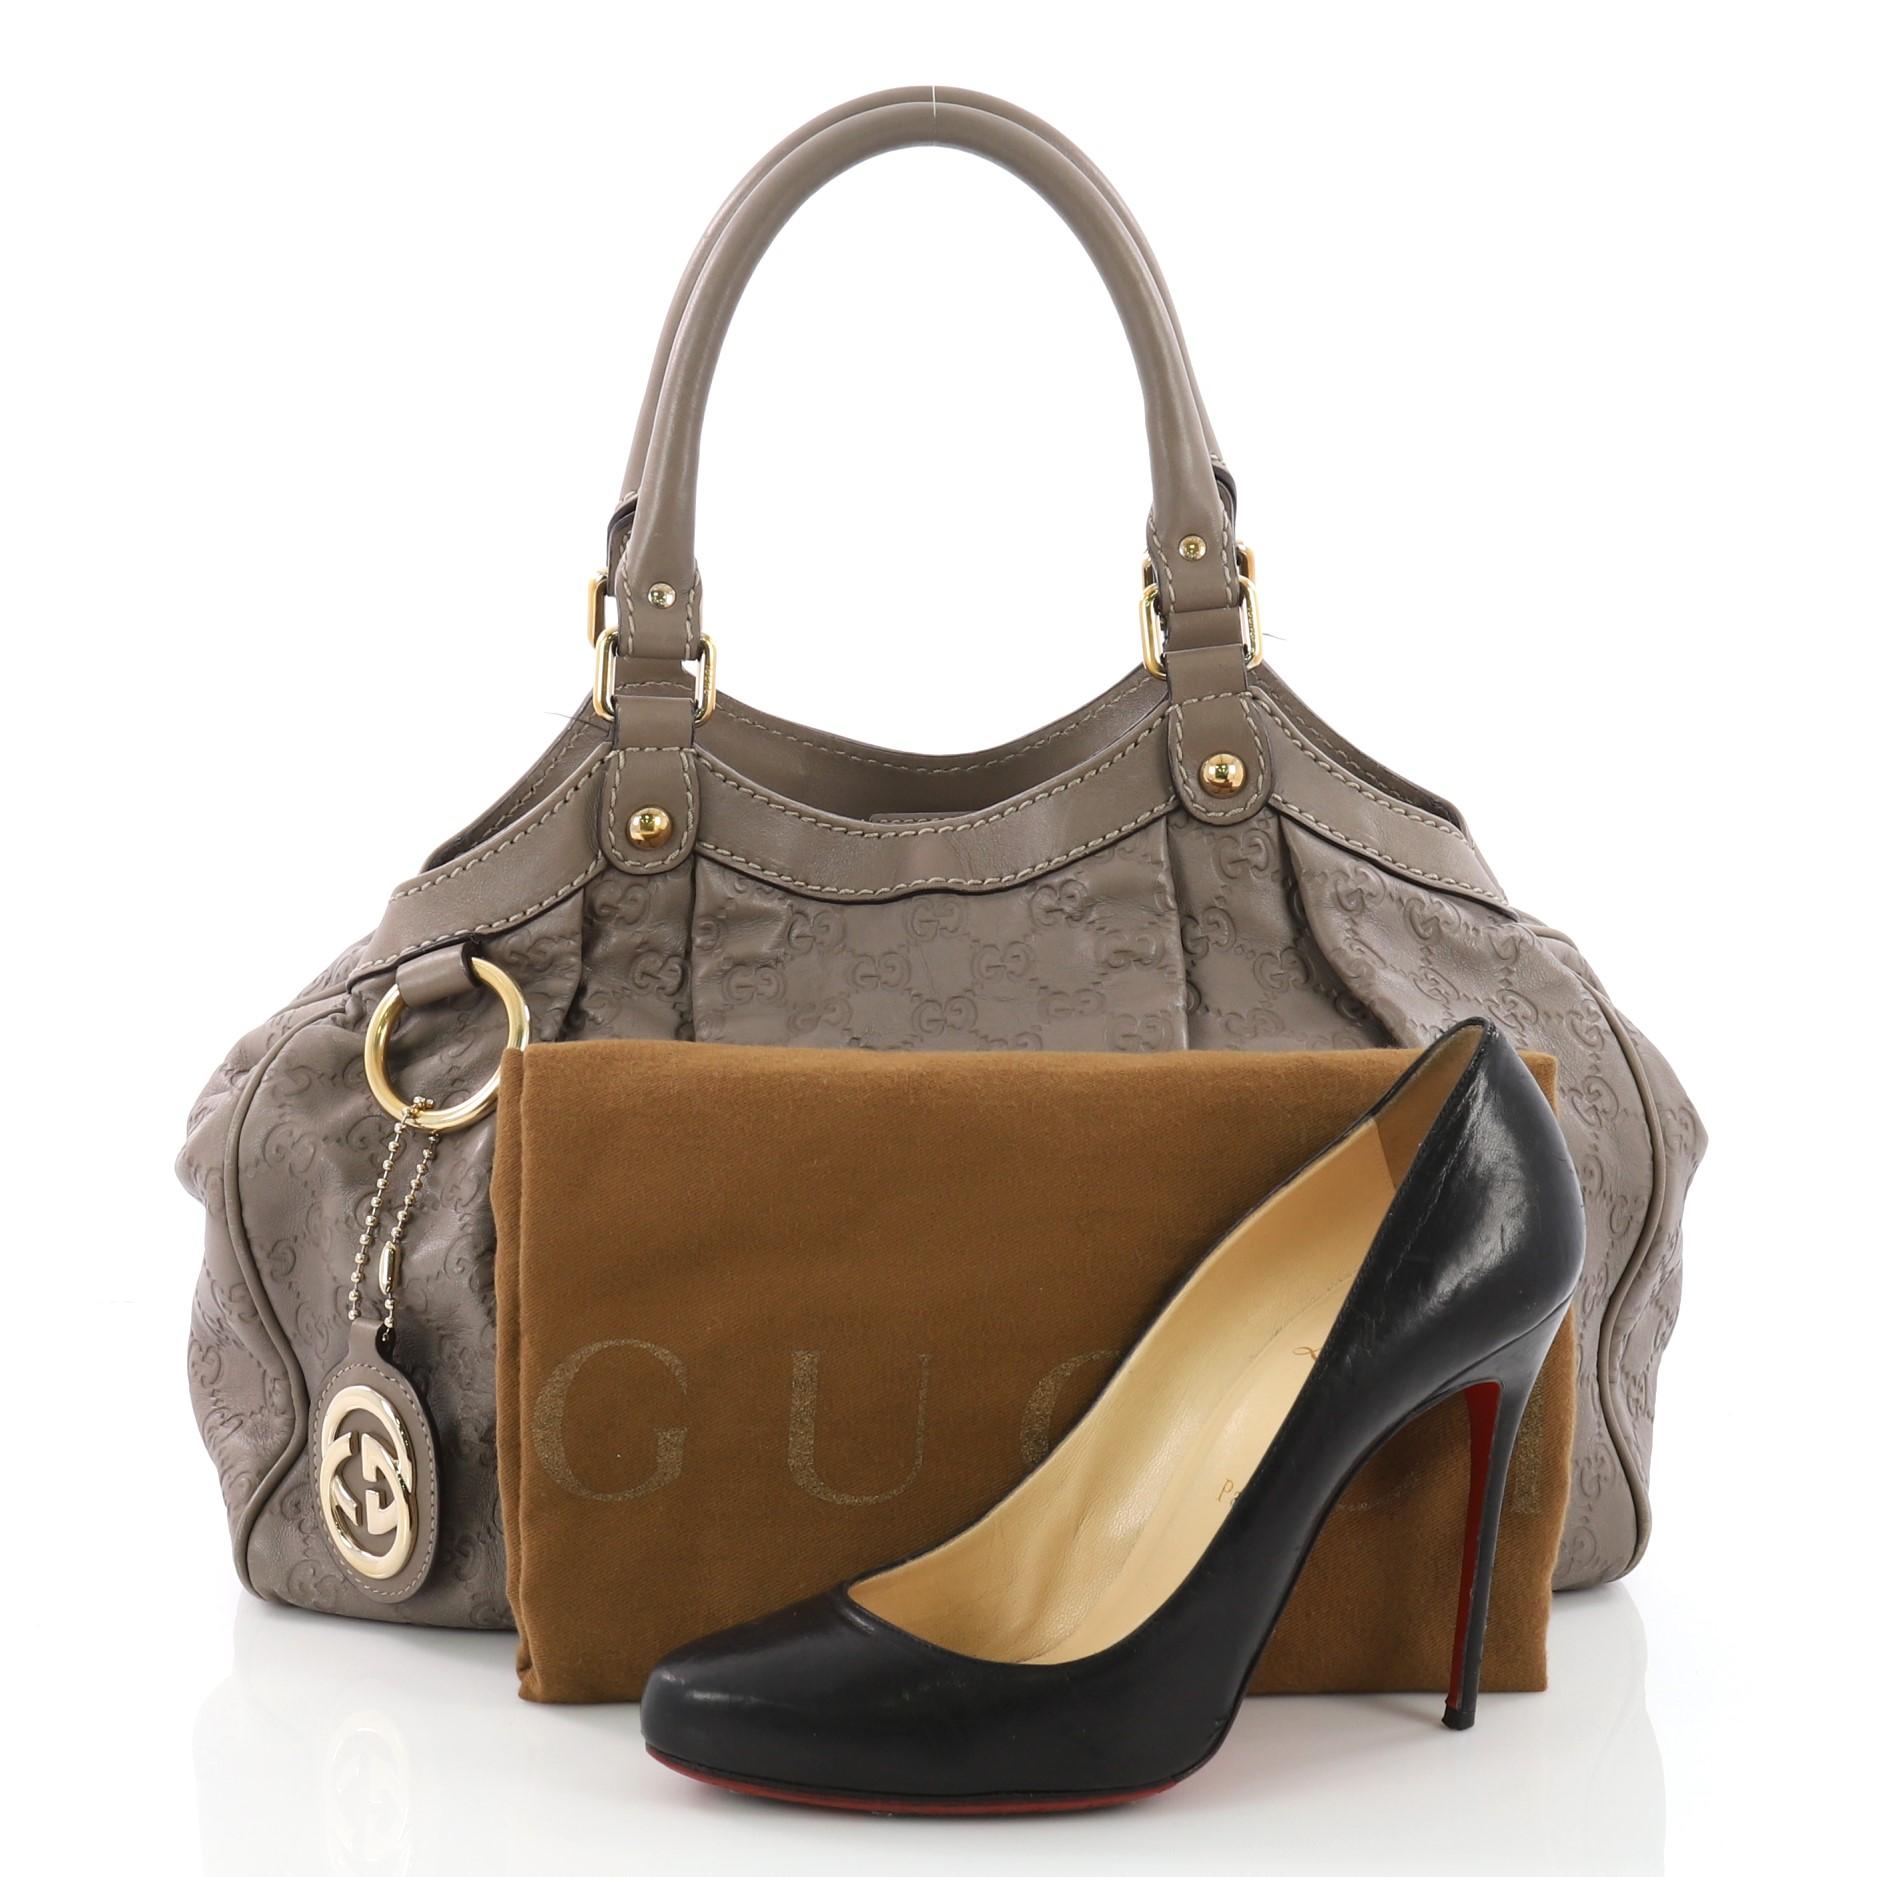 This Gucci Sukey Tote Guccissima Leather Medium, crafted from taupe guccissima leather, dual-rolled leather top handles, side snap buttons, and gold-tone hardware accents. Its top magnetic snap closure opens to a black fabric interior with a side